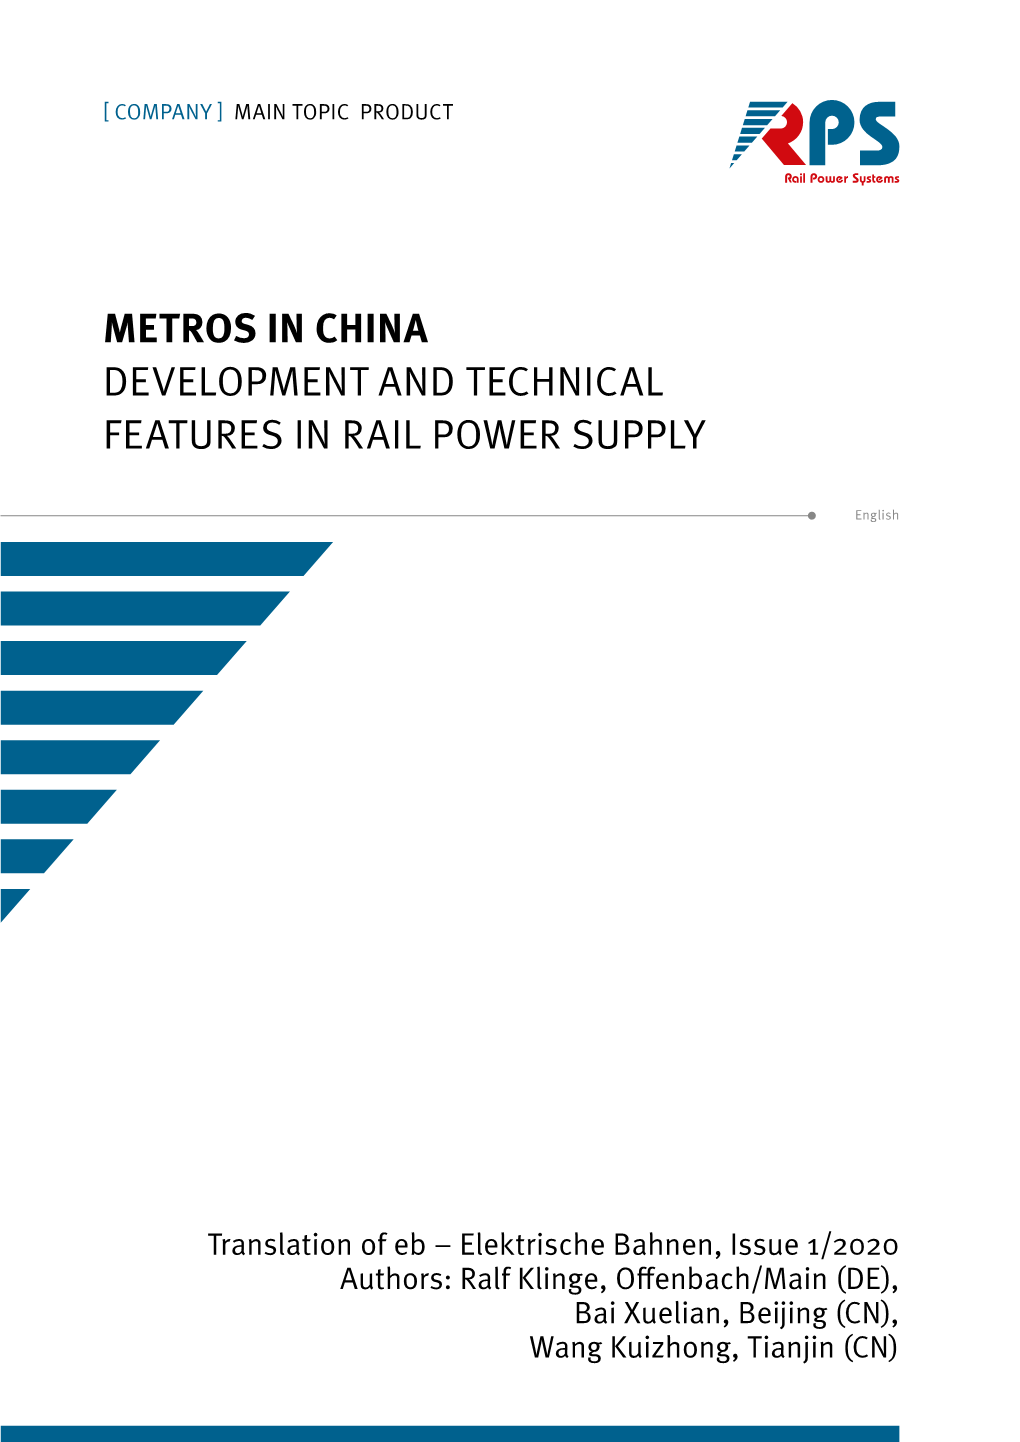 Metros in China Development and Technical Features in Rail Power Supply